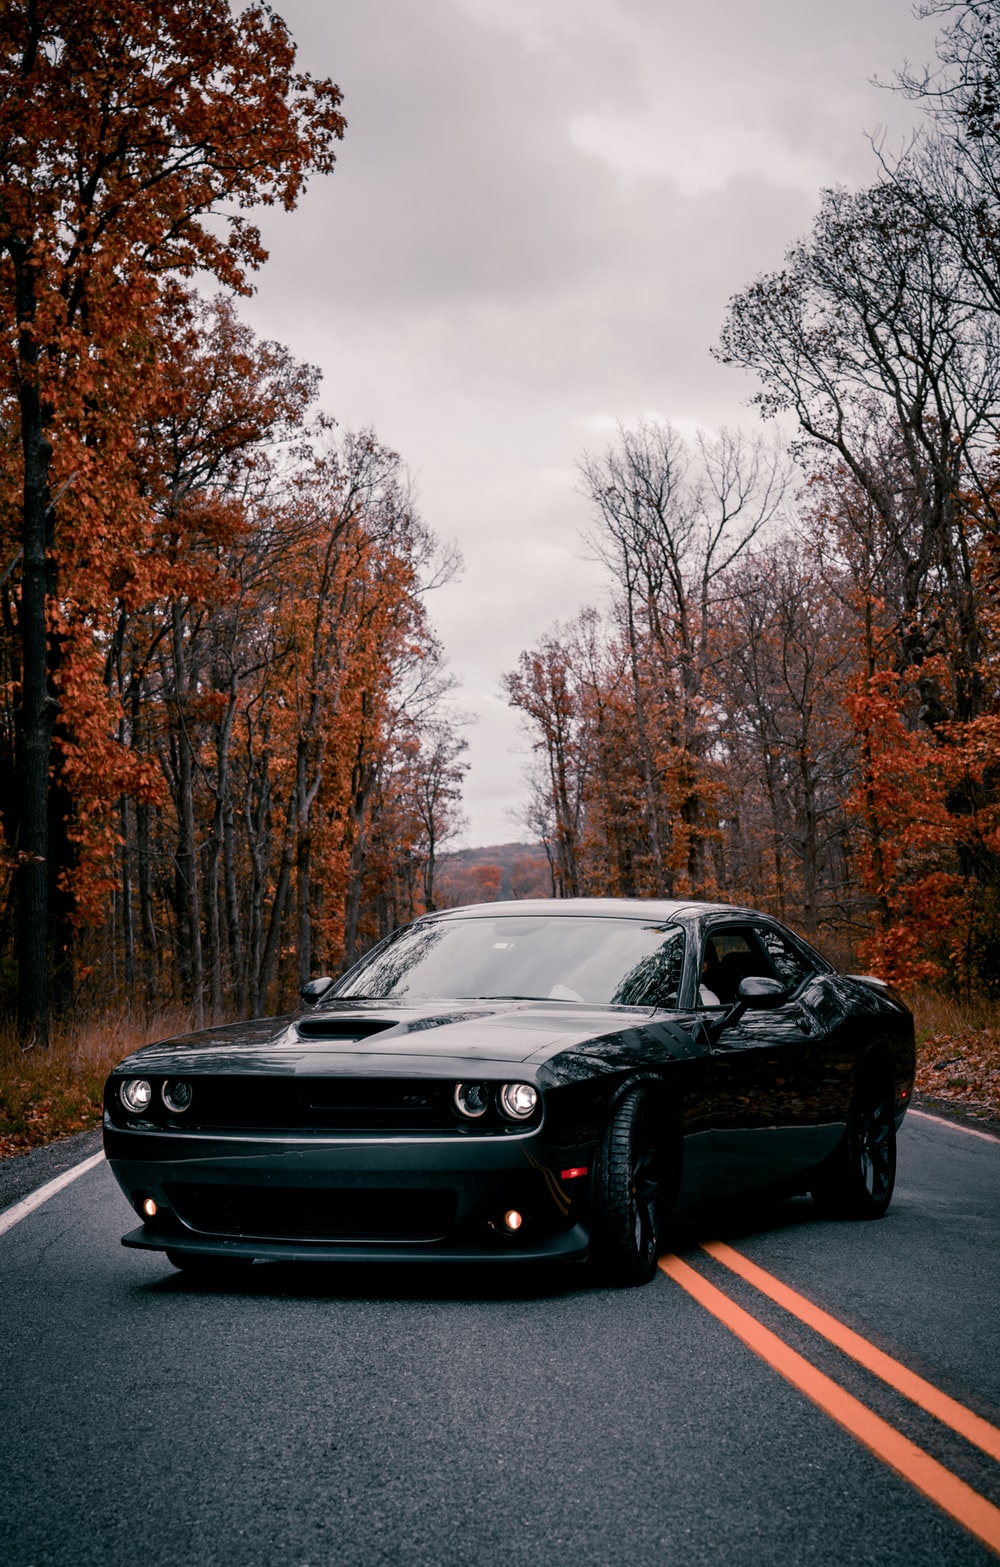 Dodge Challenger HD iPhone Wallpaper  iPhone Wallpapers  Mustang cars  Car wallpapers Dream cars